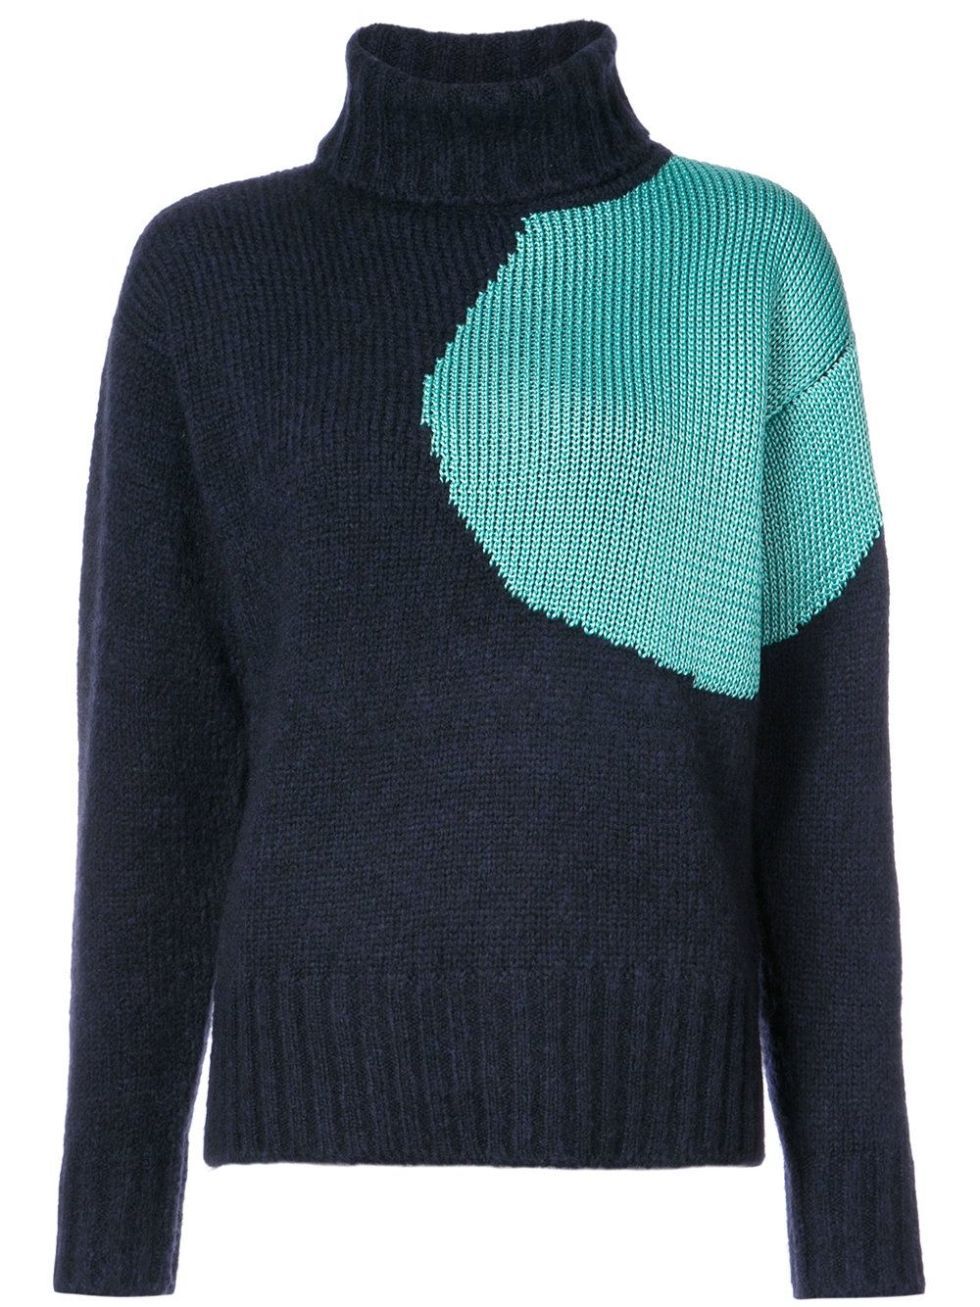 Clothing, Wool, Sweater, Turquoise, Sleeve, Outerwear, Blue, Green, Woolen, Neck, 